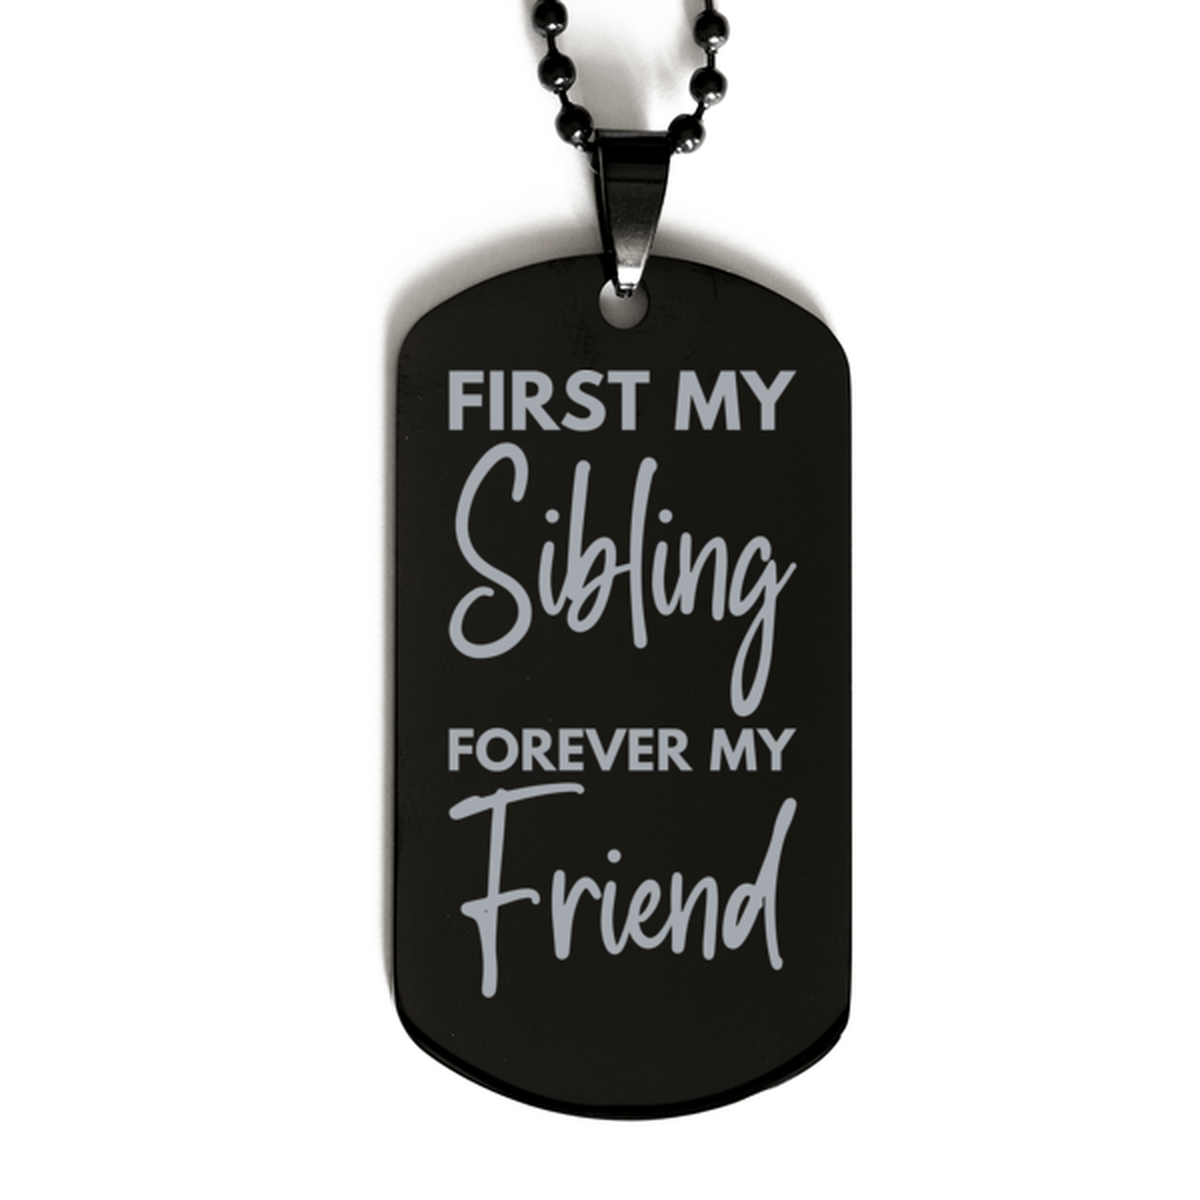 Inspirational Sibling Black Dog Tag Necklace, First My Sibling Forever My Friend, Best Birthday Gifts for Sibling